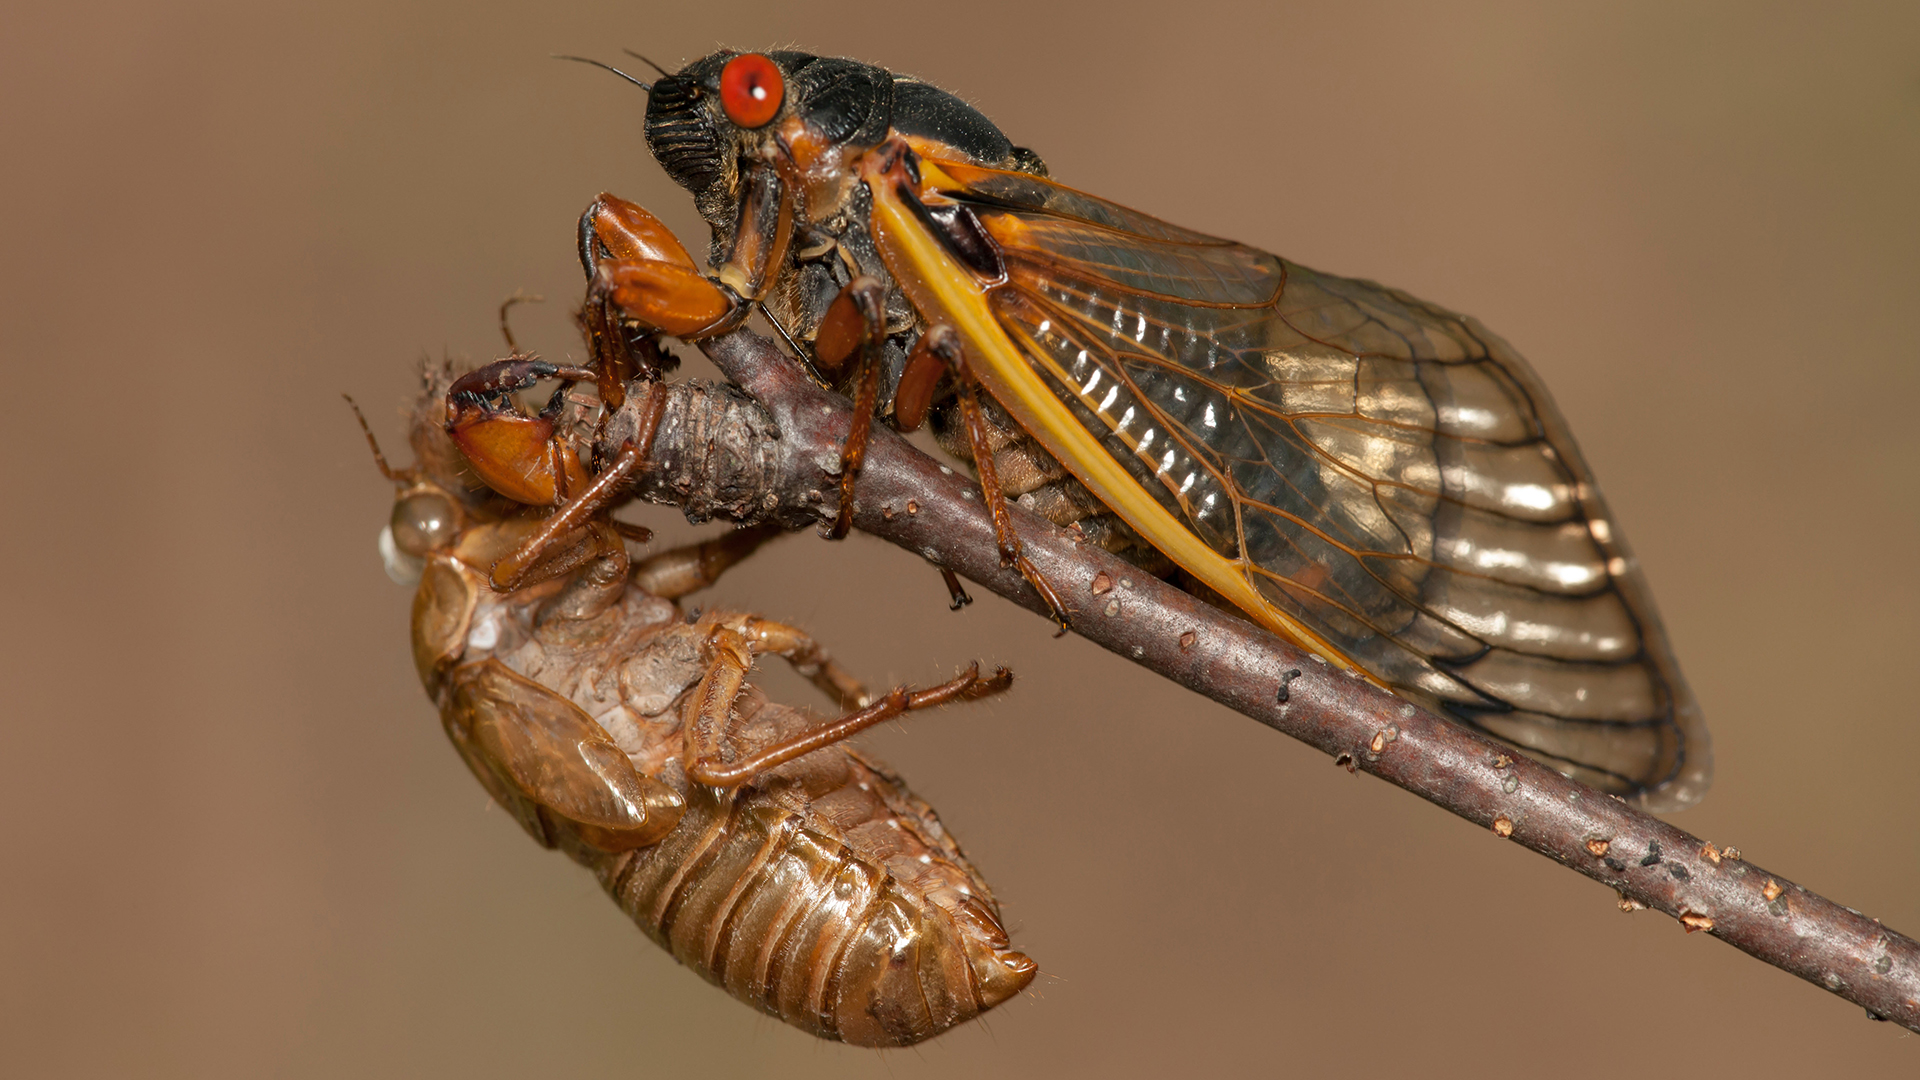 Finding those delightful Brood X cicadas Here's how Live Science